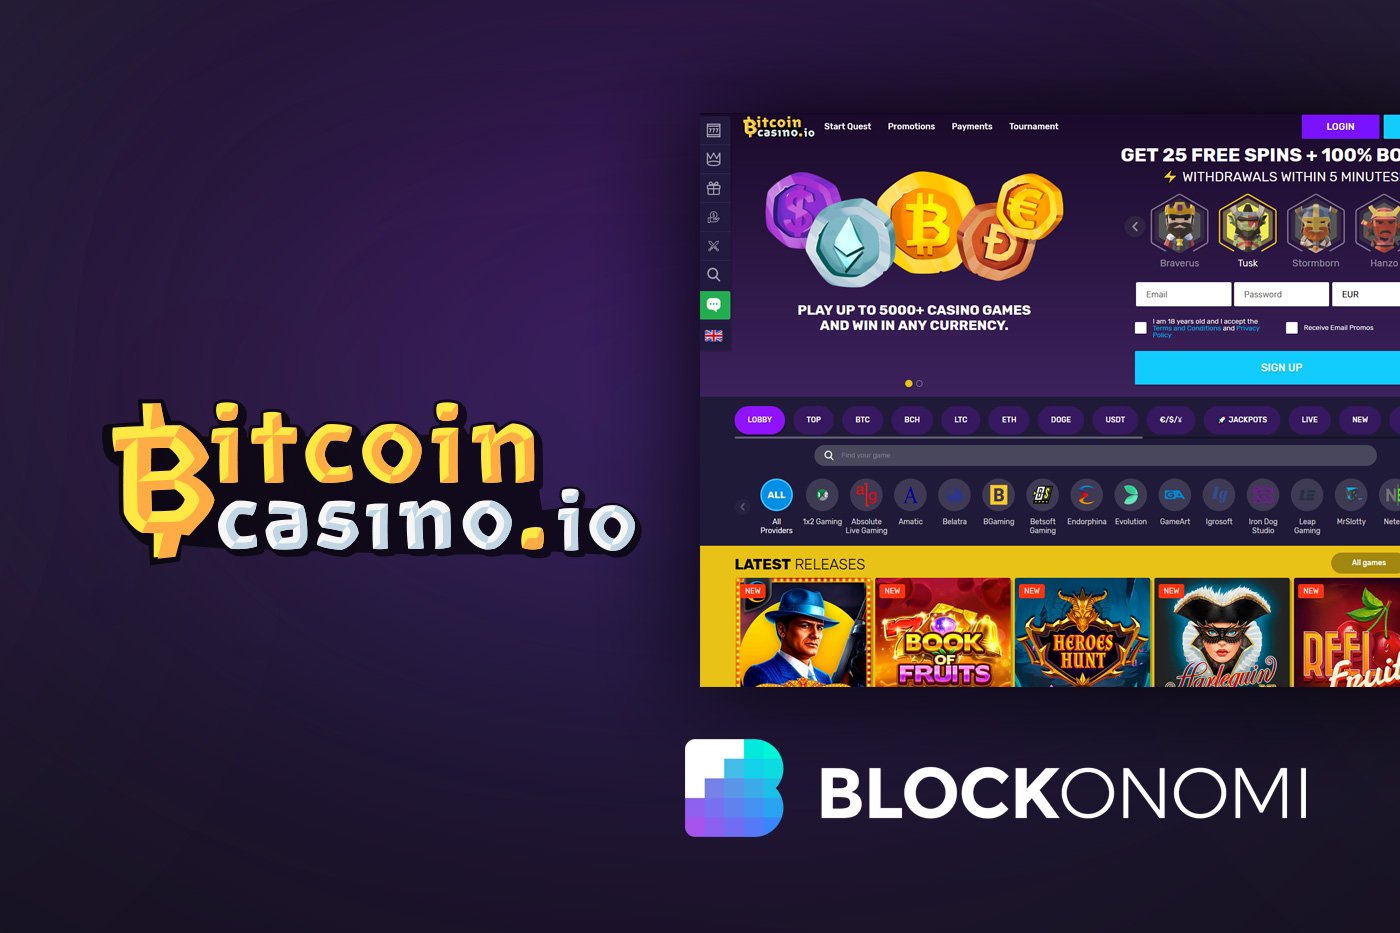 20+ Best Bitcoin Casinos Our Top Crypto Casino Picks Ranked!